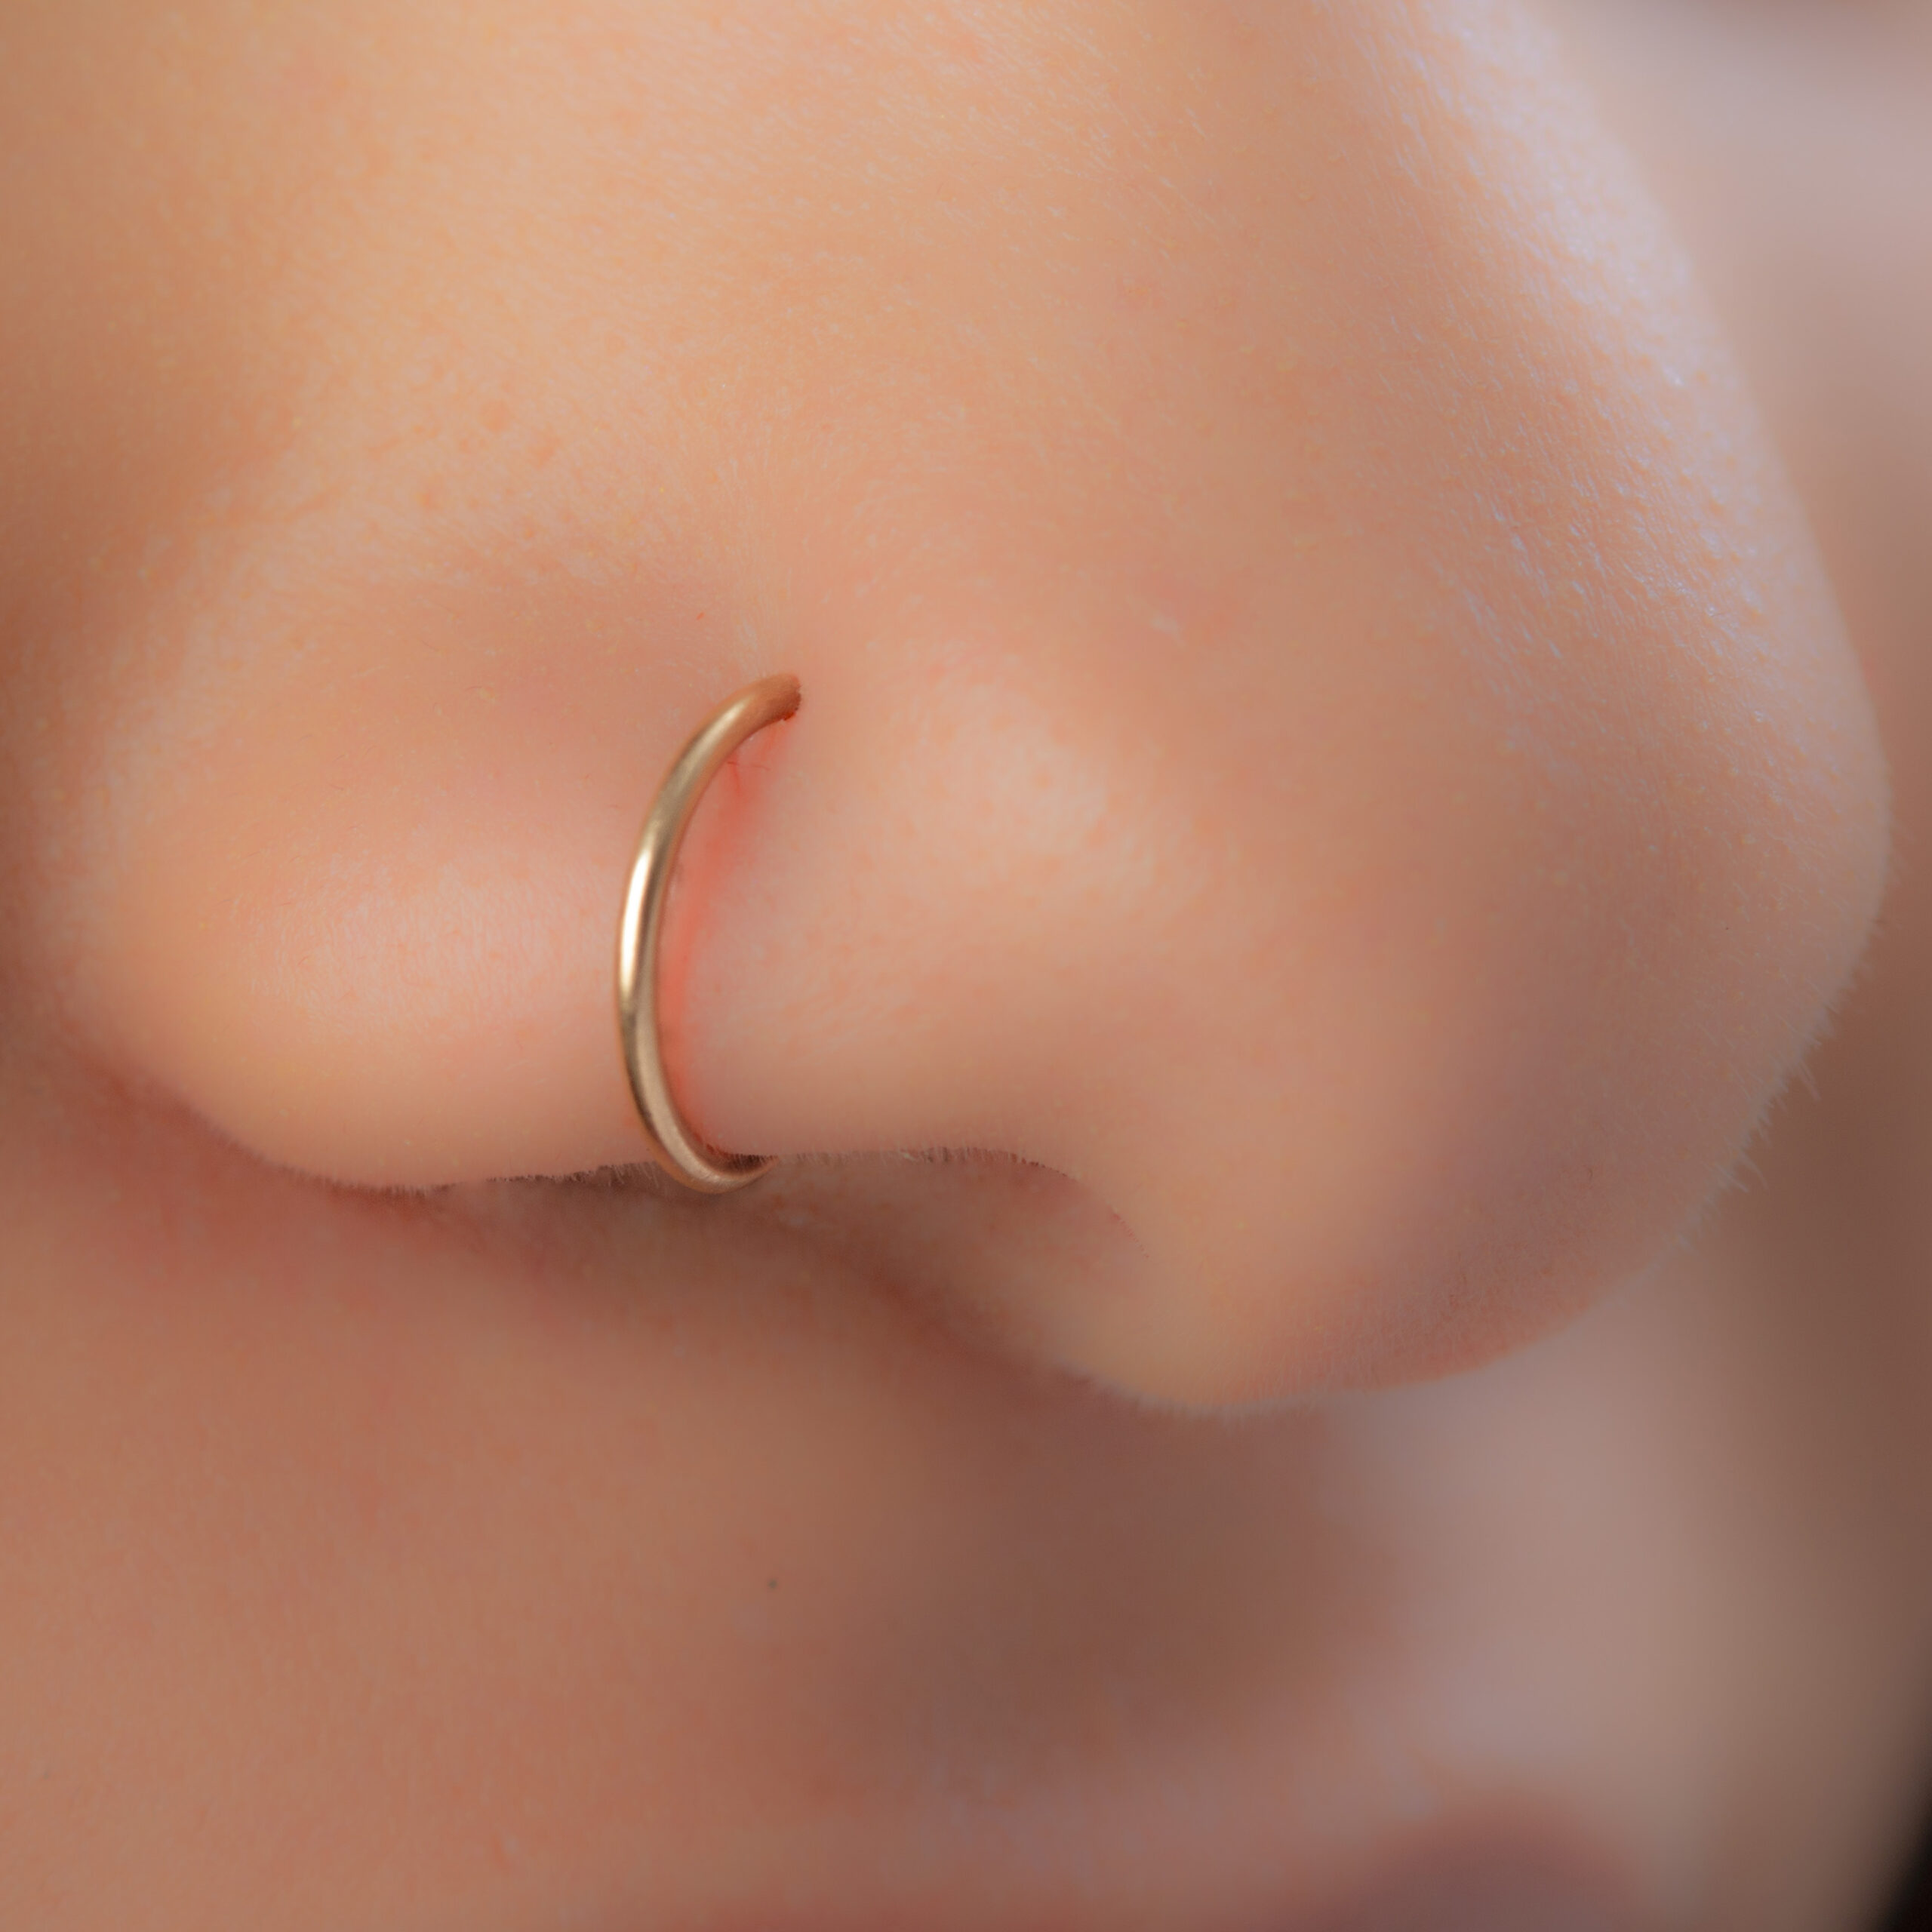 Amazon.com: Nose Ring, 14K Solid Yellow Gold Tribal Asymmetric Nose Hoop,  Fits Cartilage, Helix, Tragus Earring, Handmade Piercing Jewelry, 20g-21g :  Handmade Products